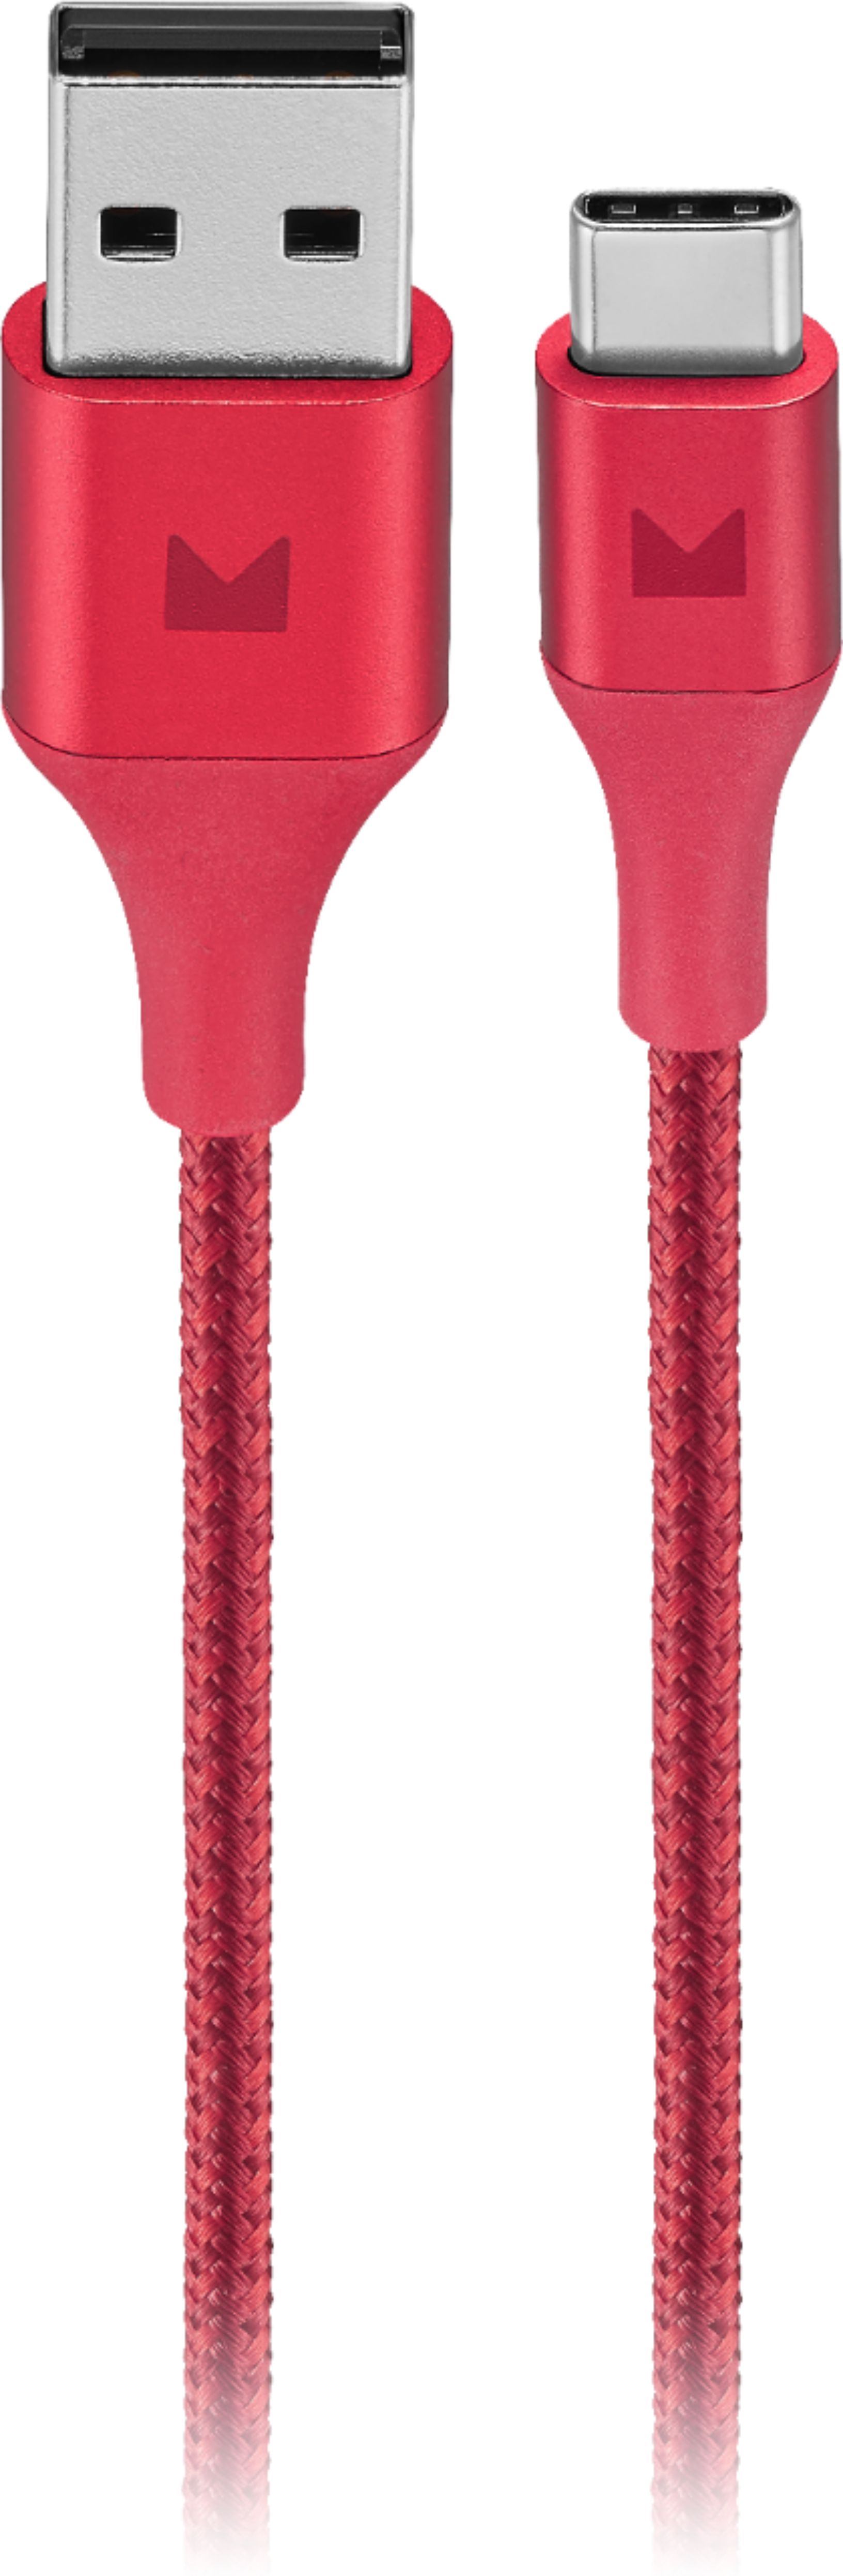 0600603260735 - MODAL™ - 4 USB-C TO USB-A CHARGE-AND-SYNC CABLE - RED